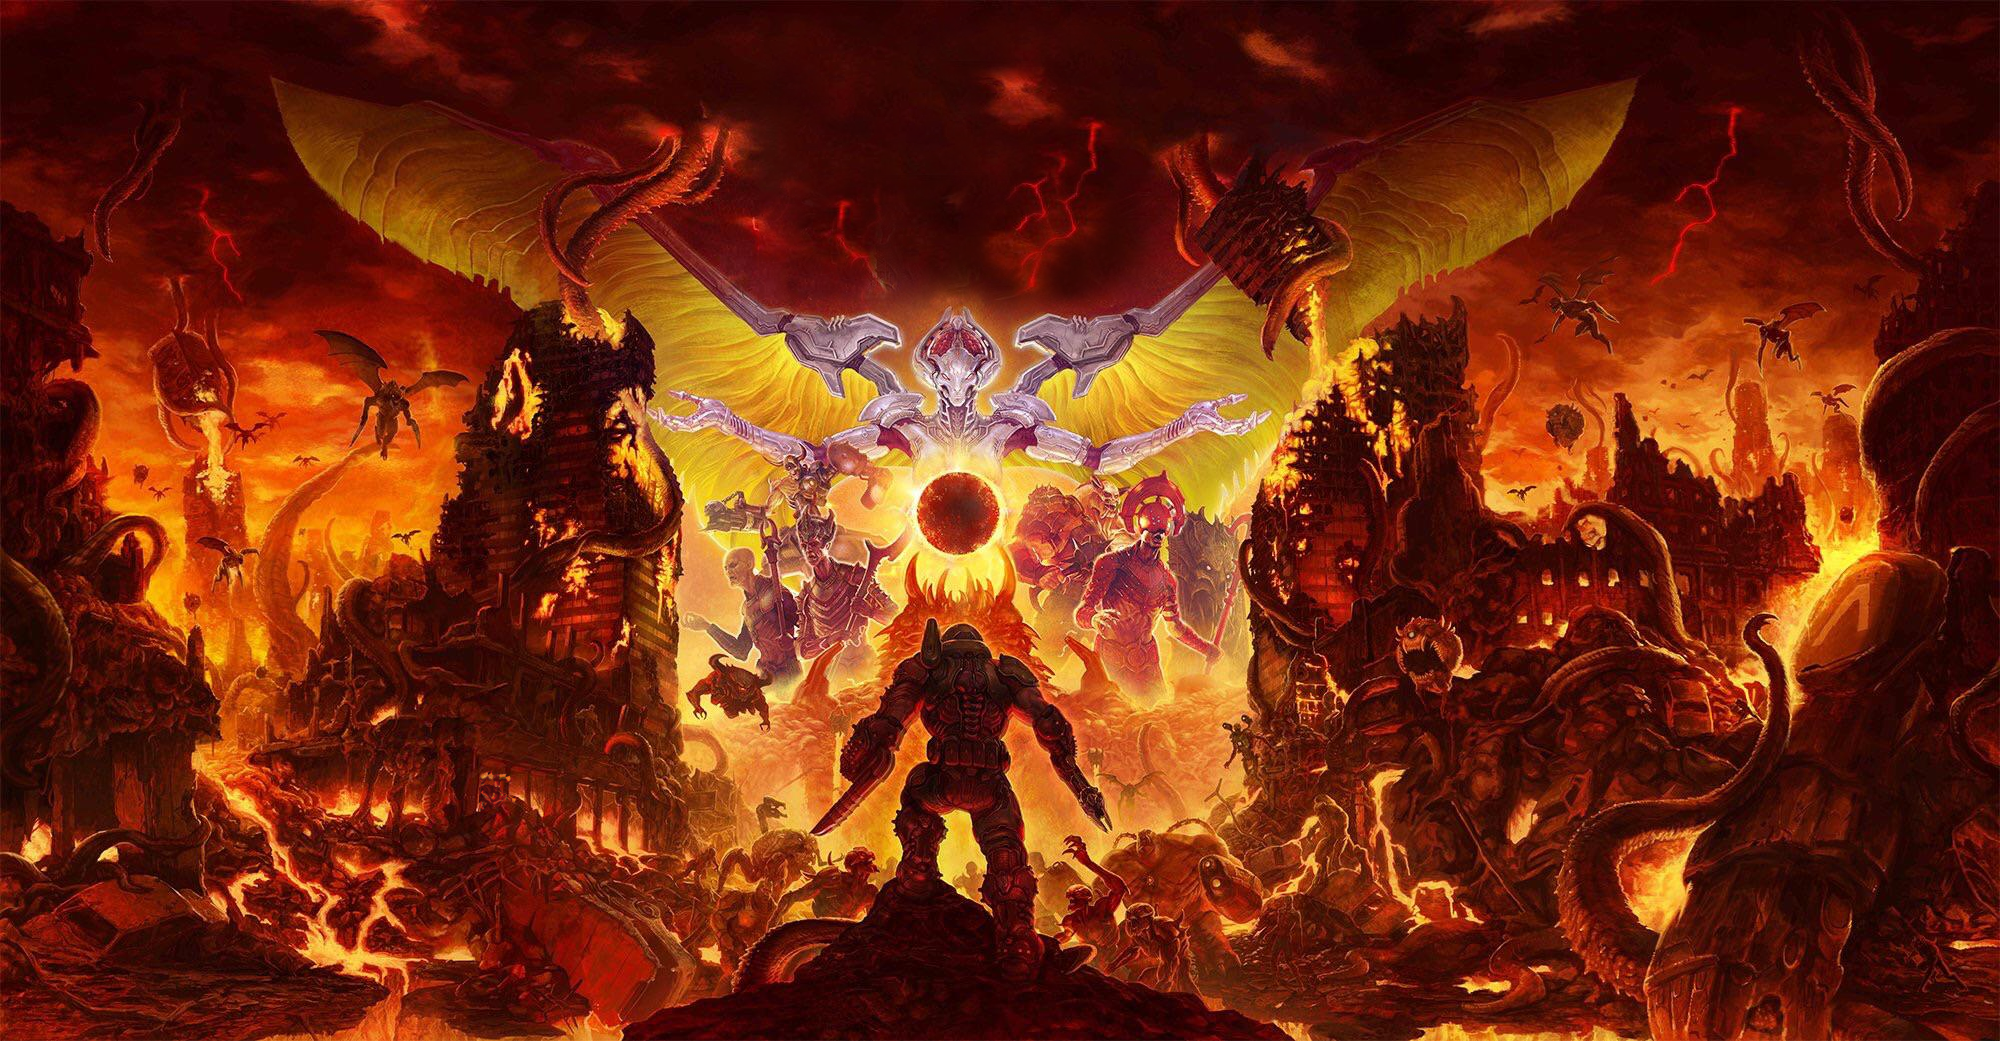 A definitive ranking of the DOOM games' hellscapes